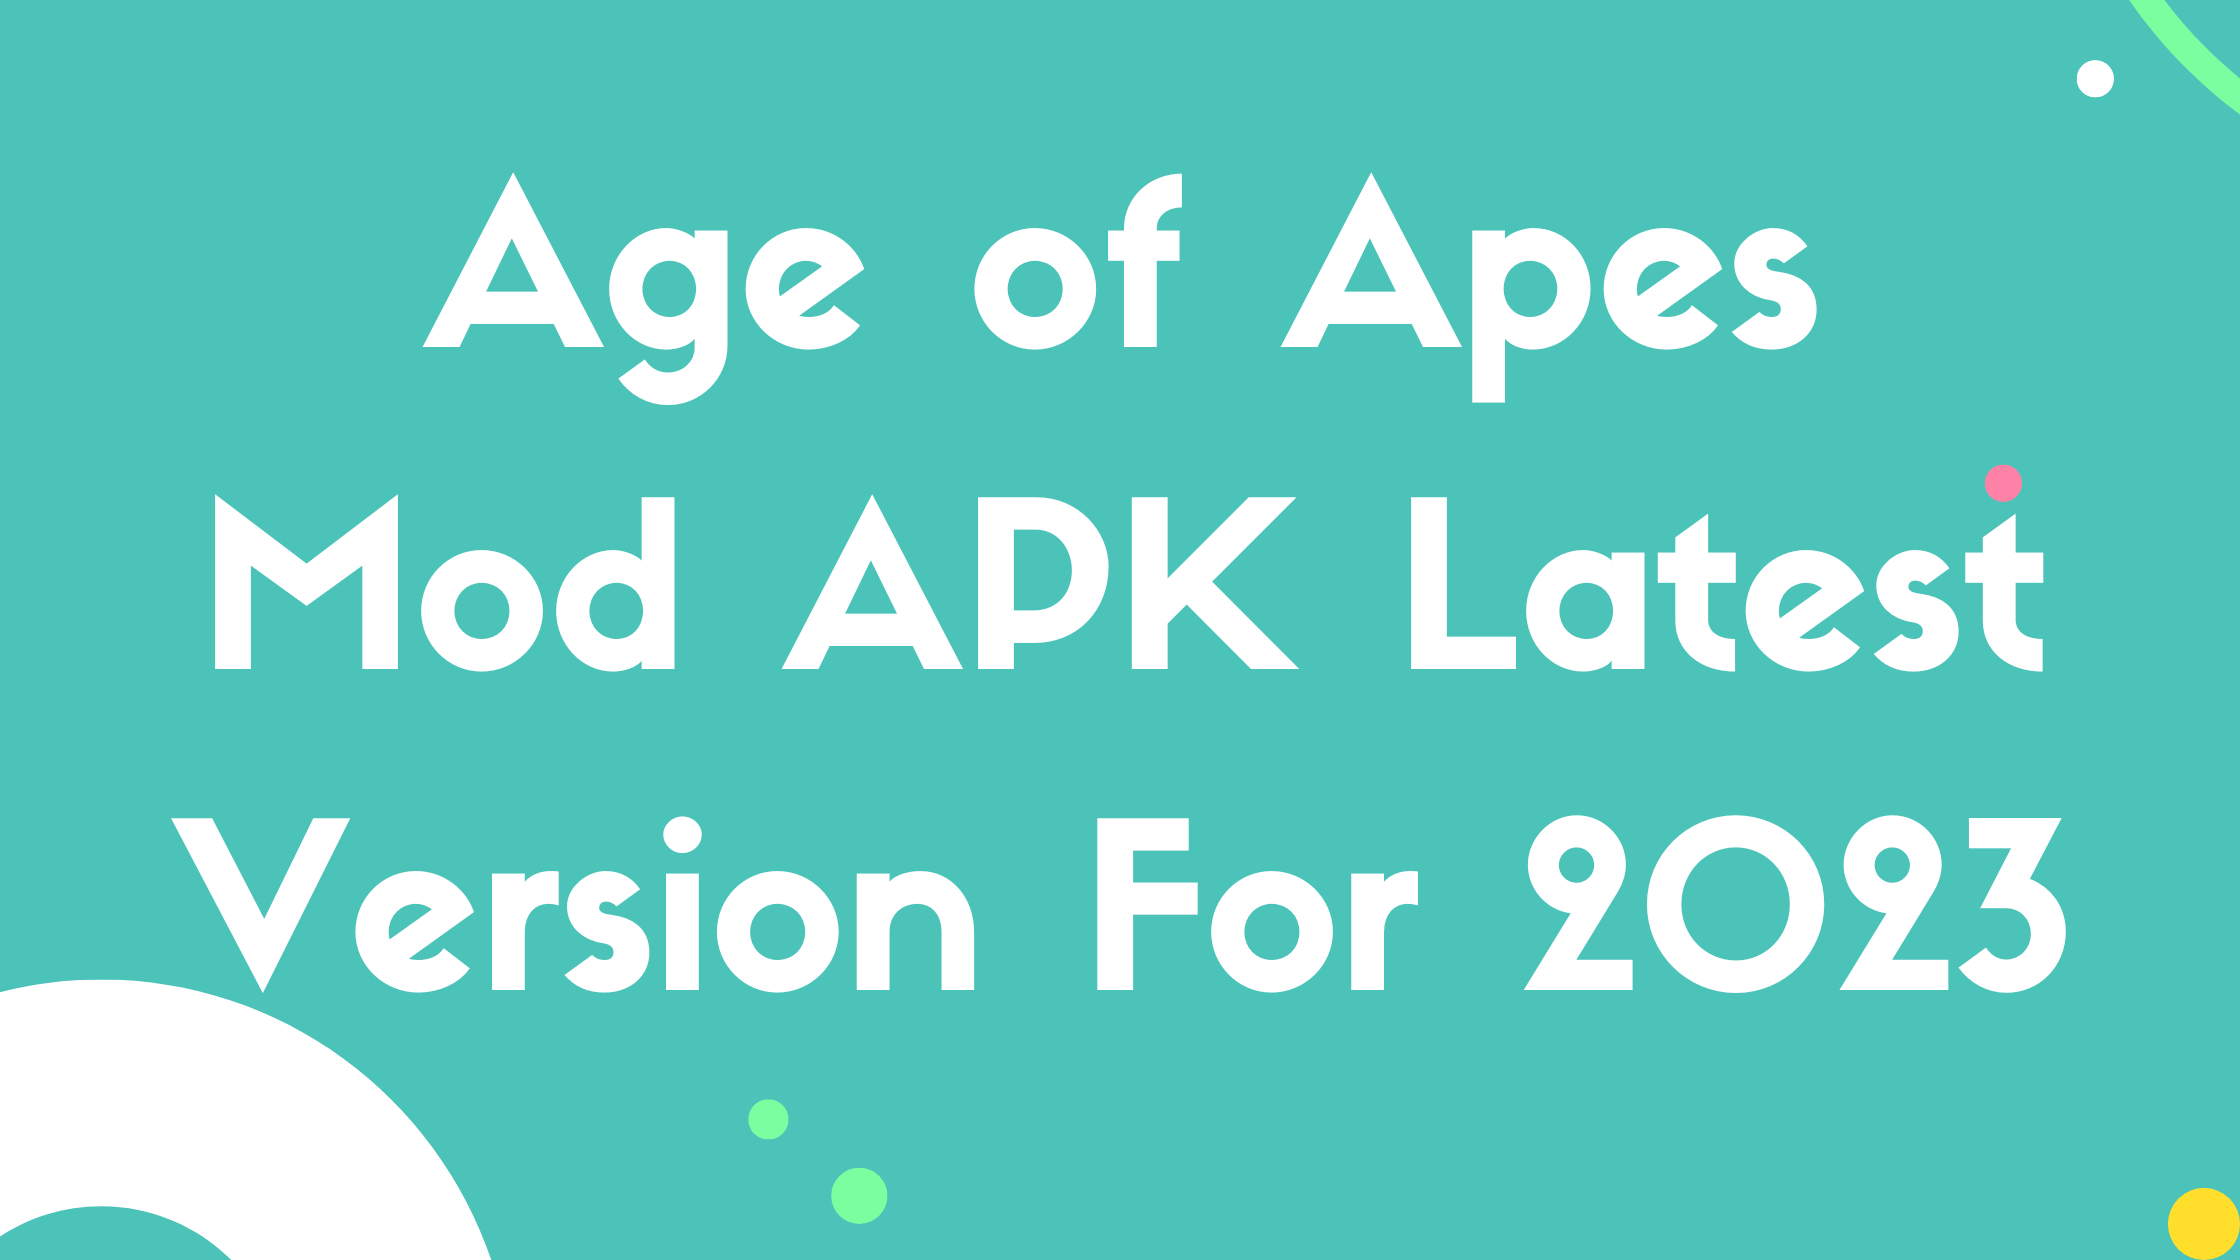 Age of Apes Mod APK Latest Version For 2023